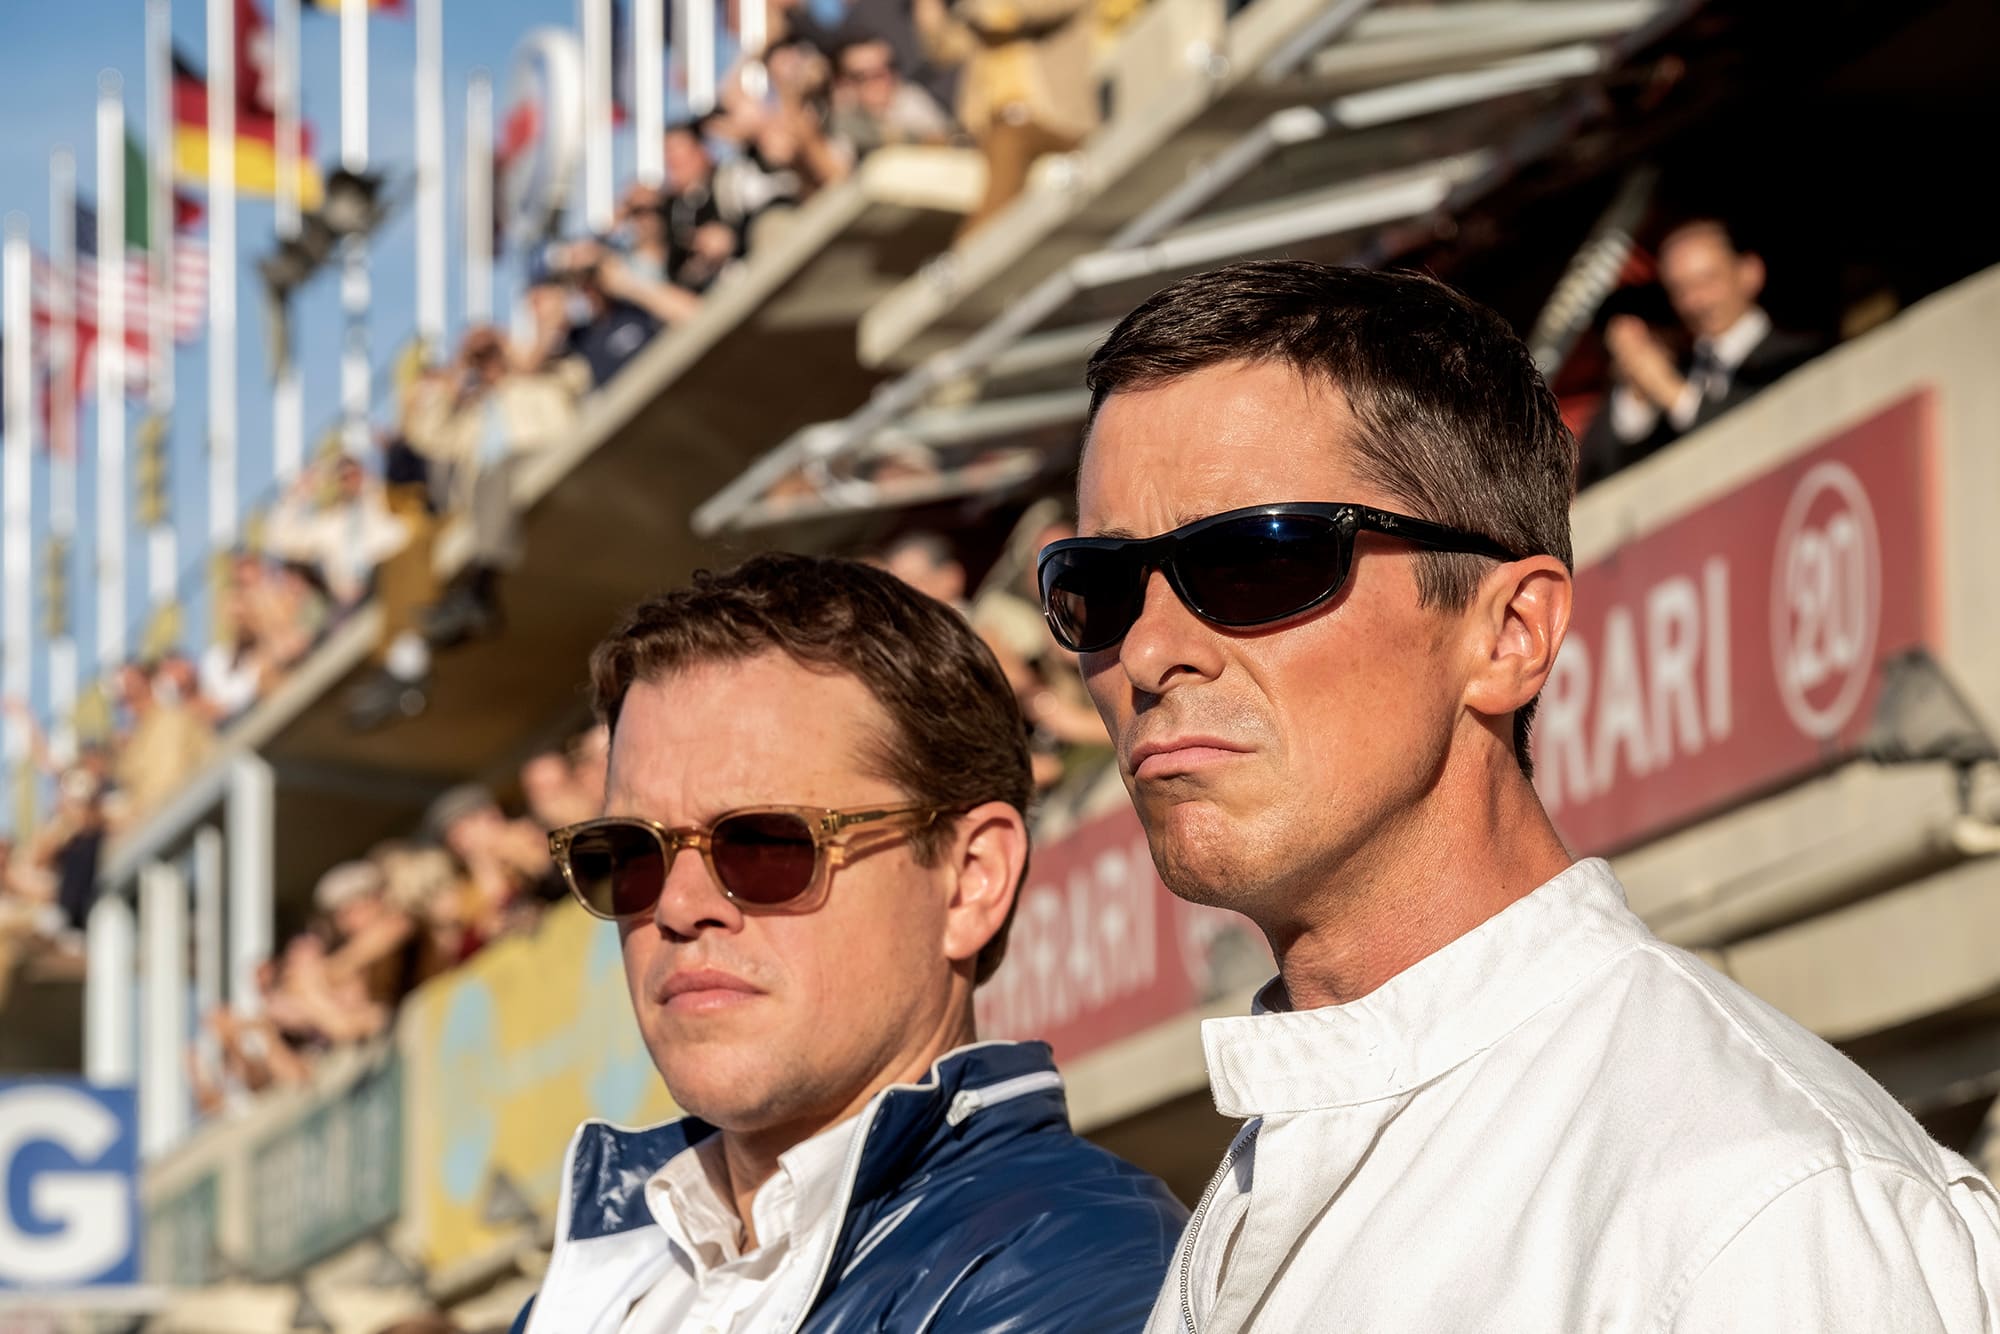 Christan Bale and Matt Damon in Le Mans 66 - the story of Ford vs Ferrari at Le Mans